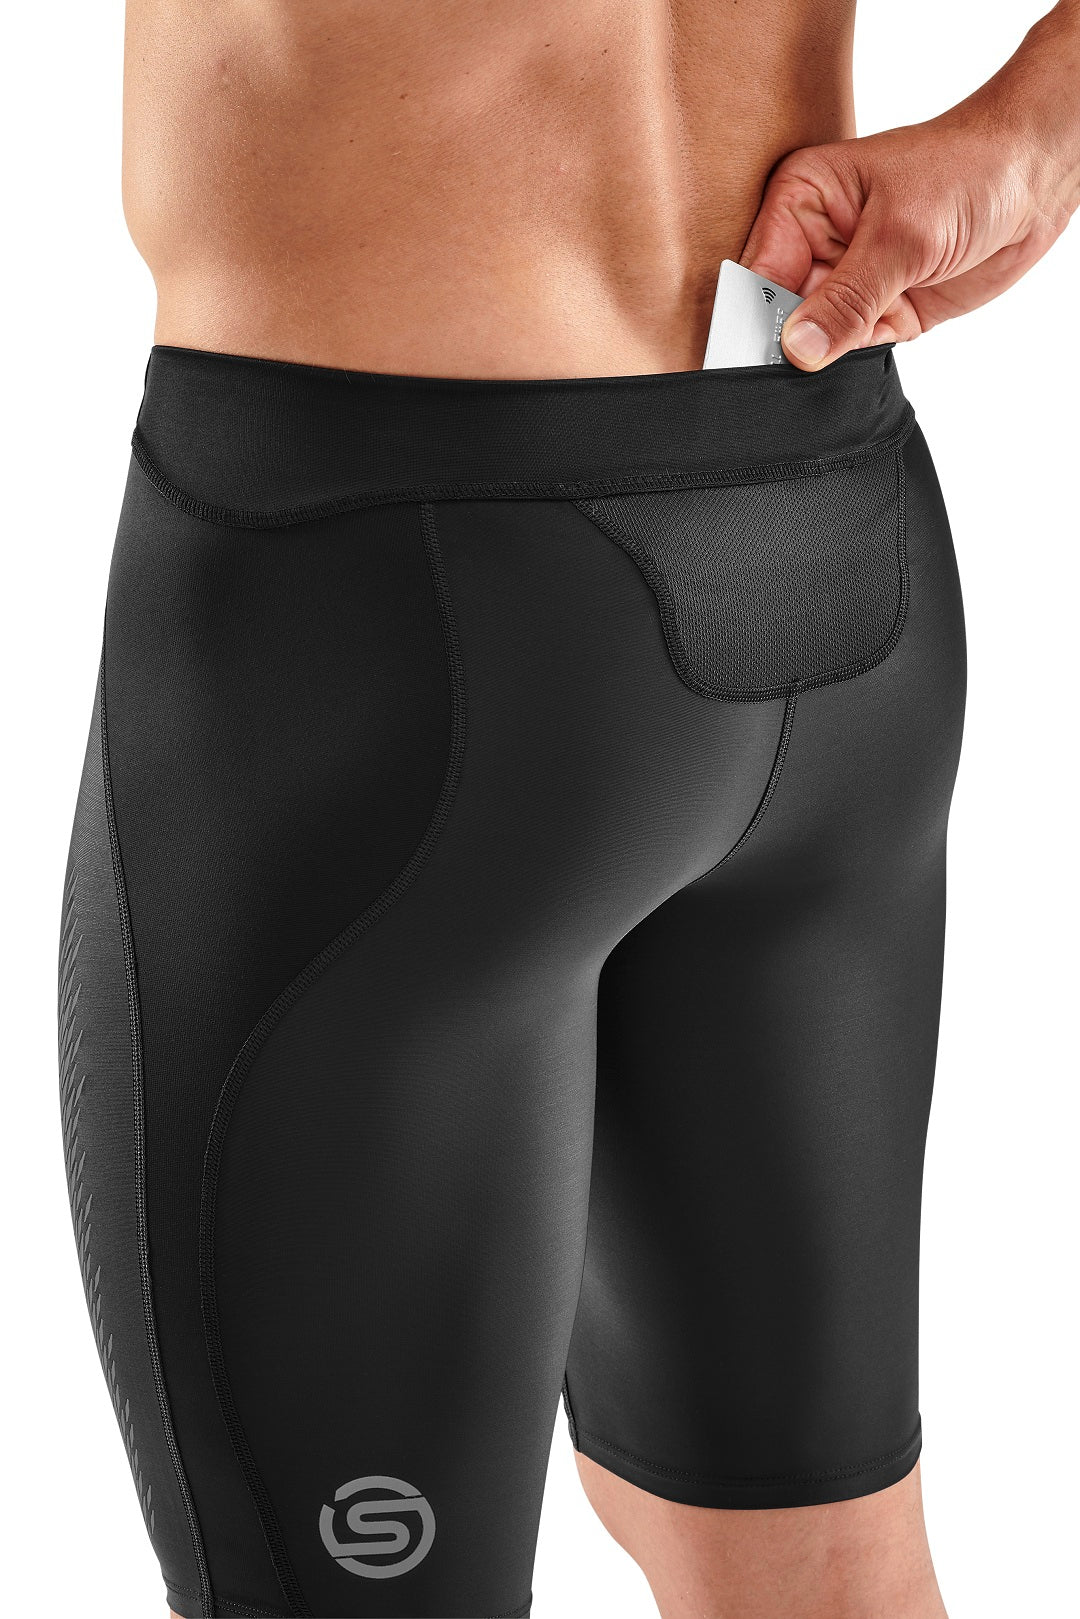 Skins Compression A400 Half Tights Review